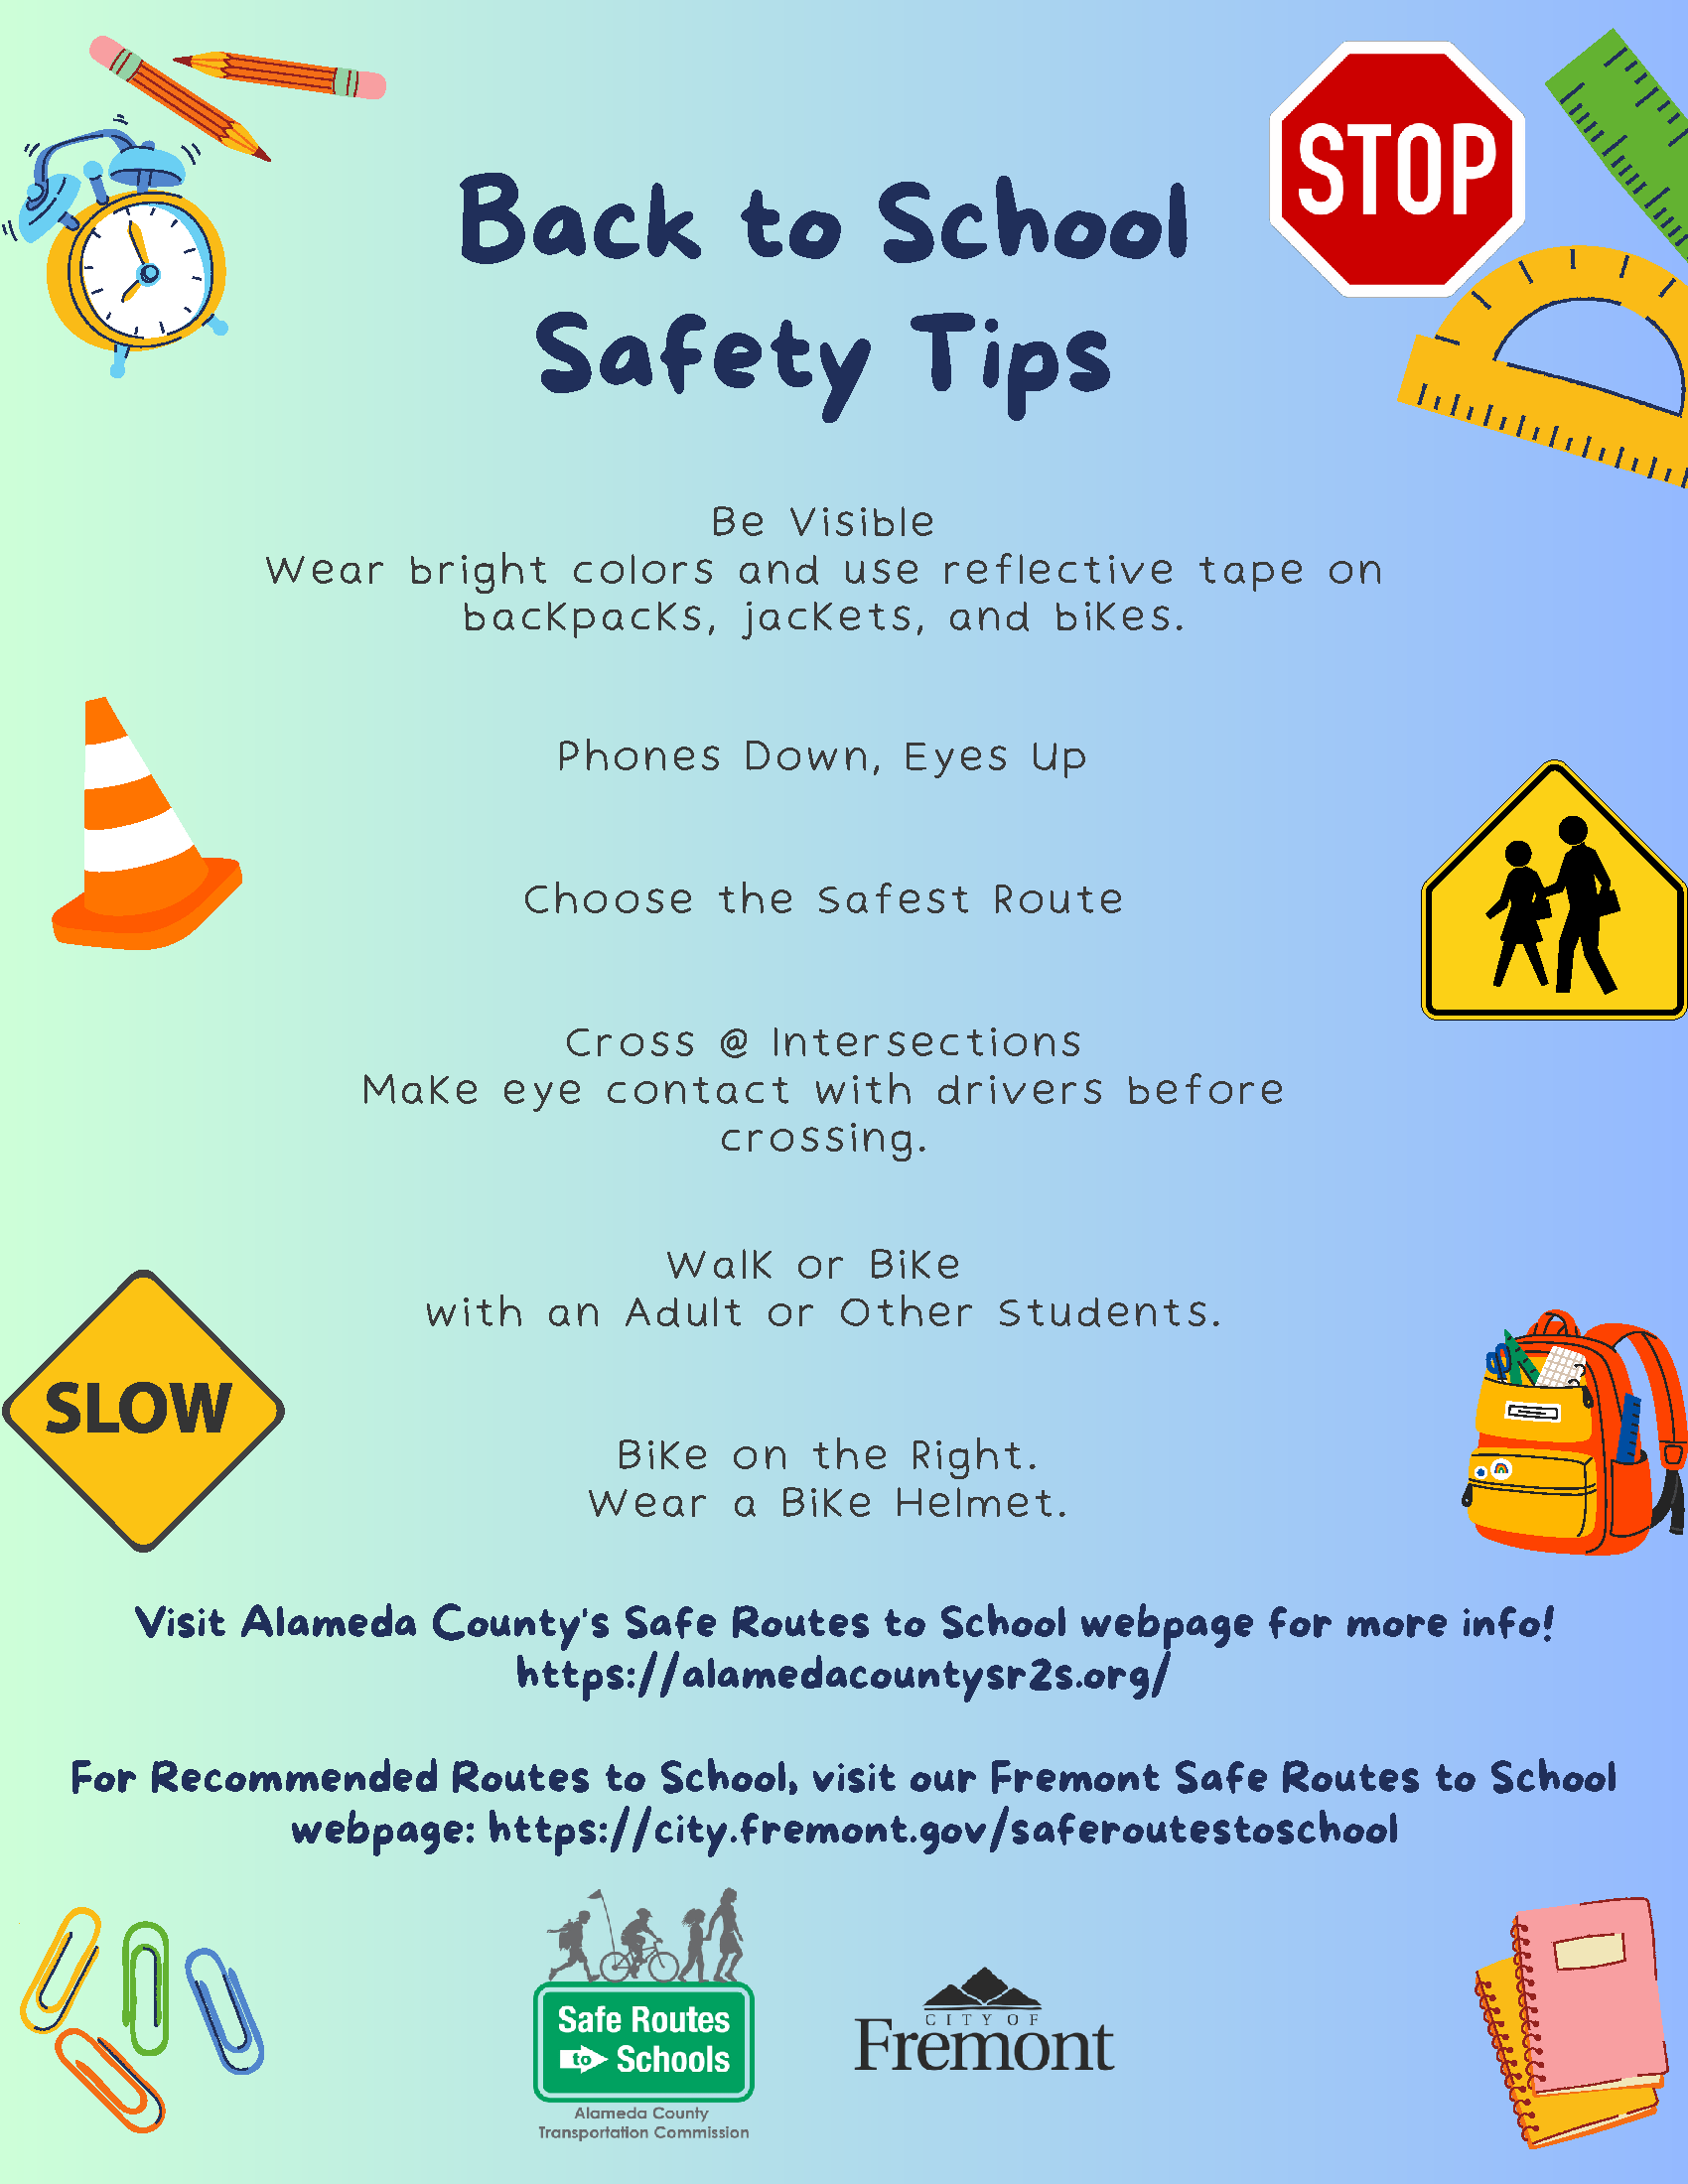 City of Fremont Back to School Safety Tips - Centerville